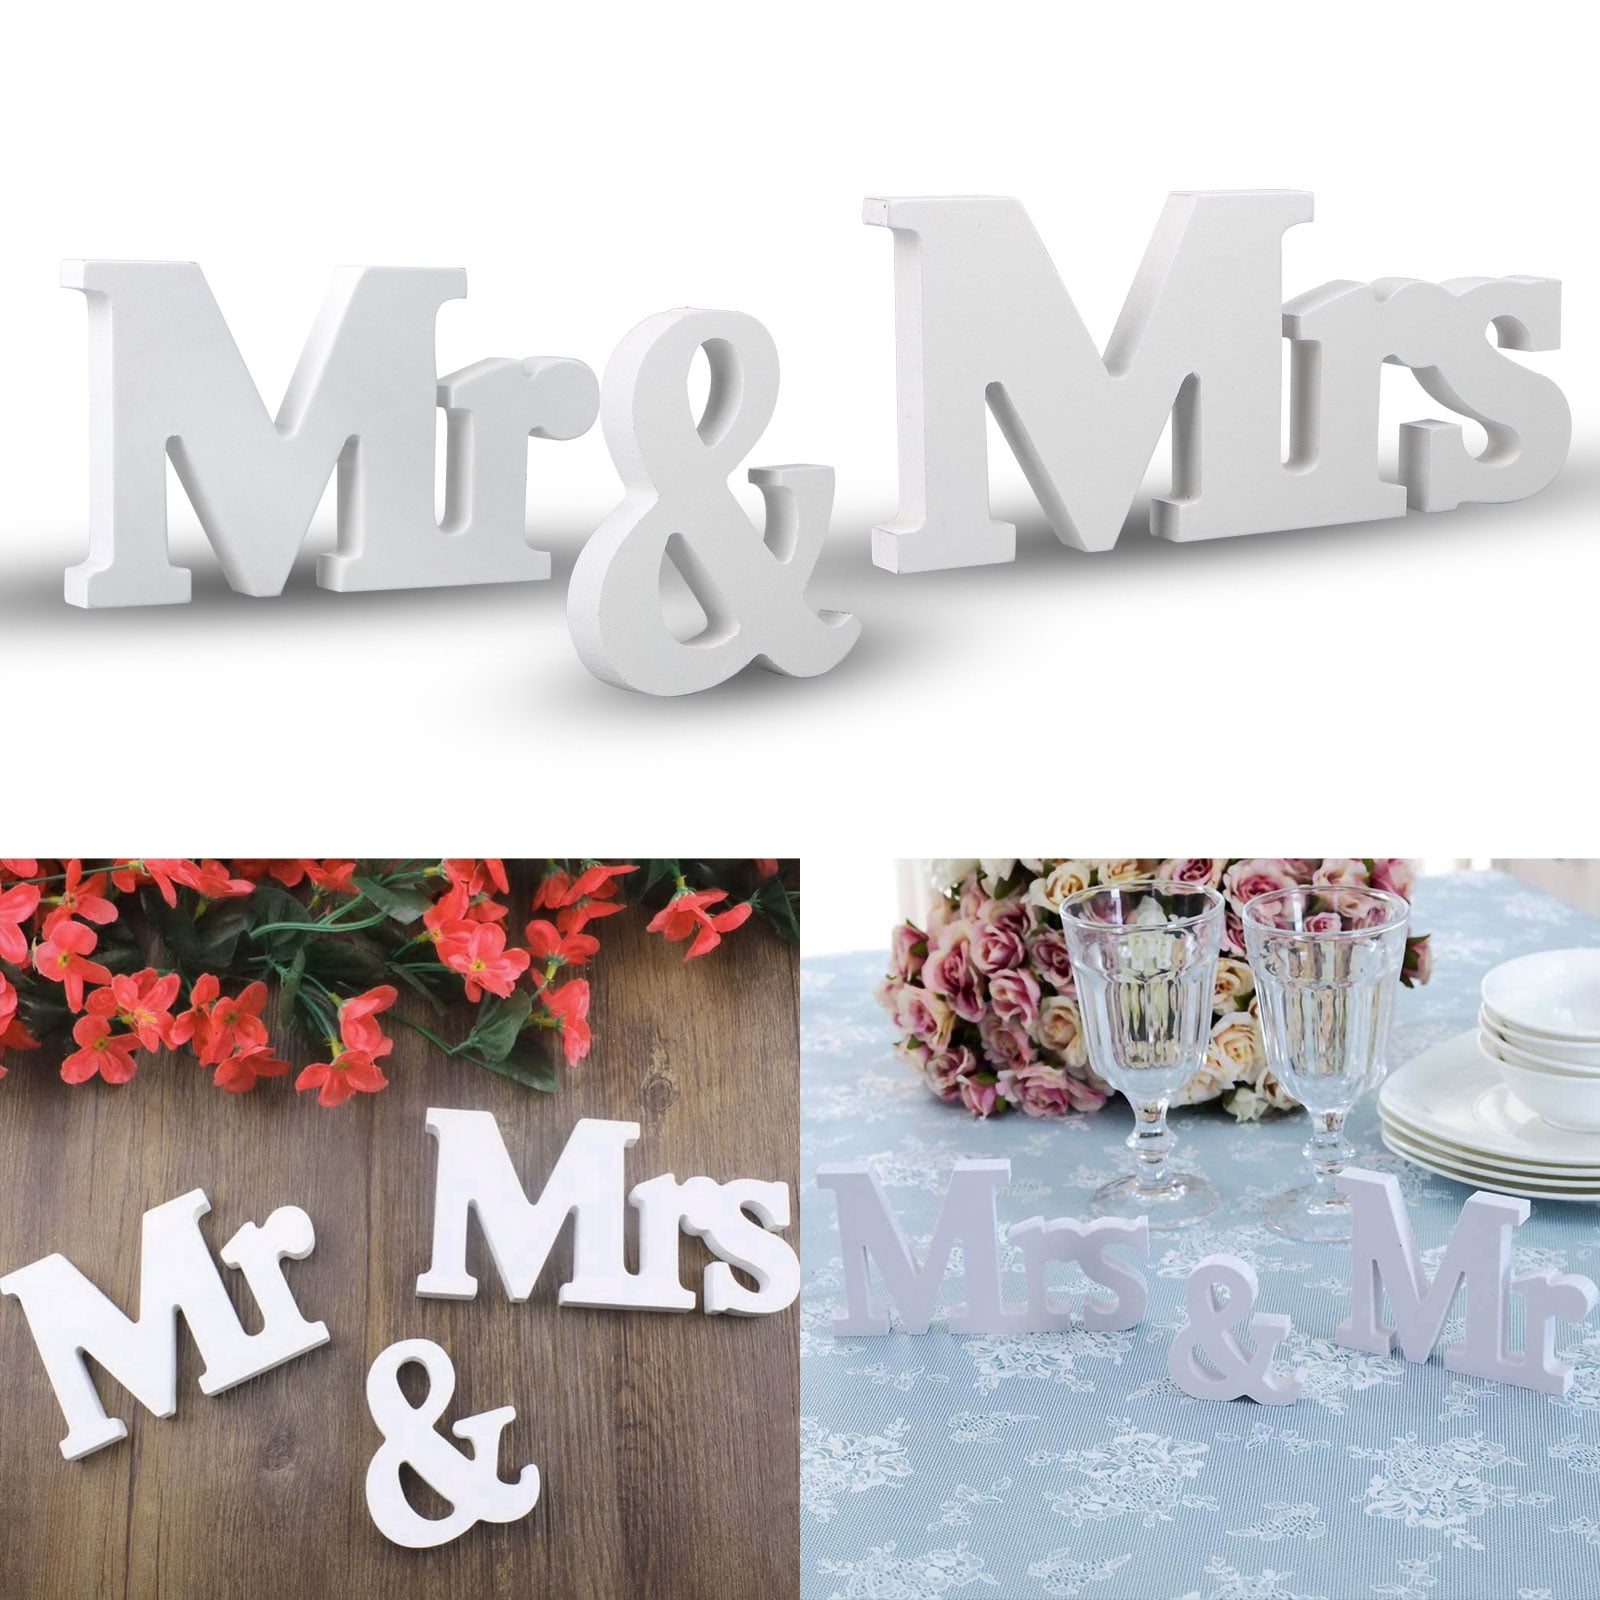 Details about   Wedding Decoration Mr & Mrs White Wooden Letters Sign For Sweetheart Table Decor 